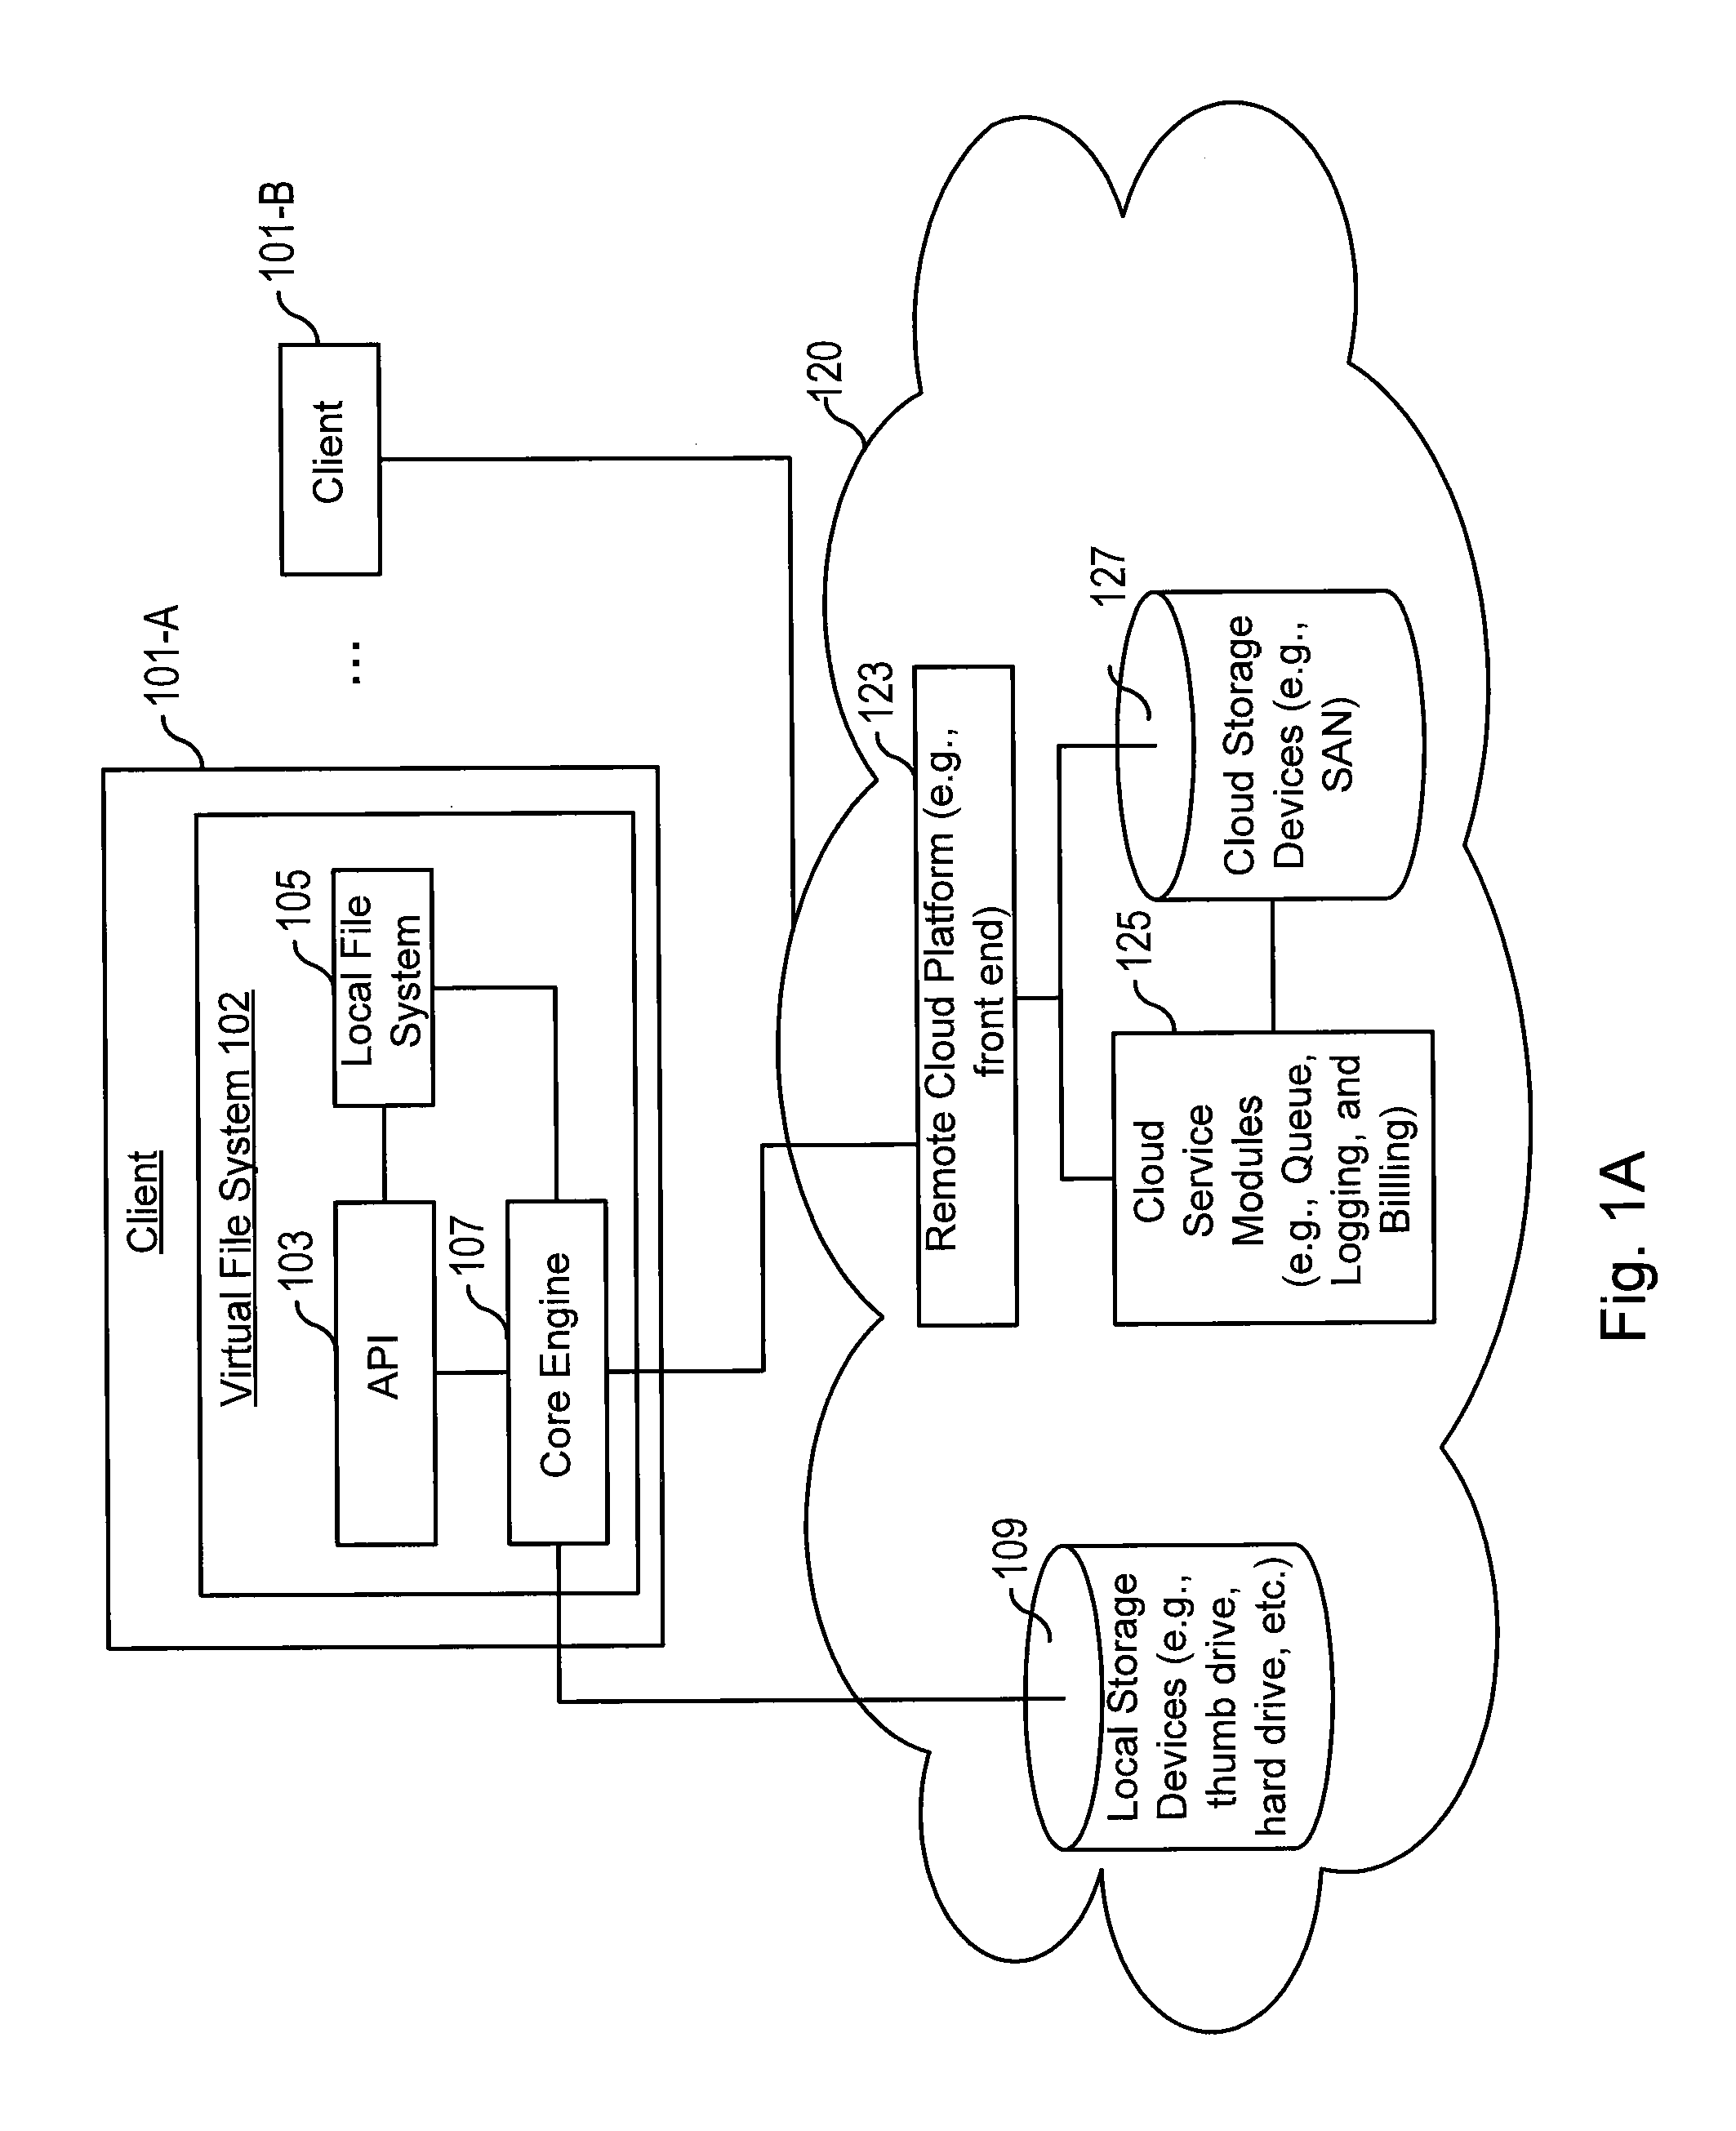 Method and System for Resolving Conflicts Between Revisions to a Distributed Virtual File System